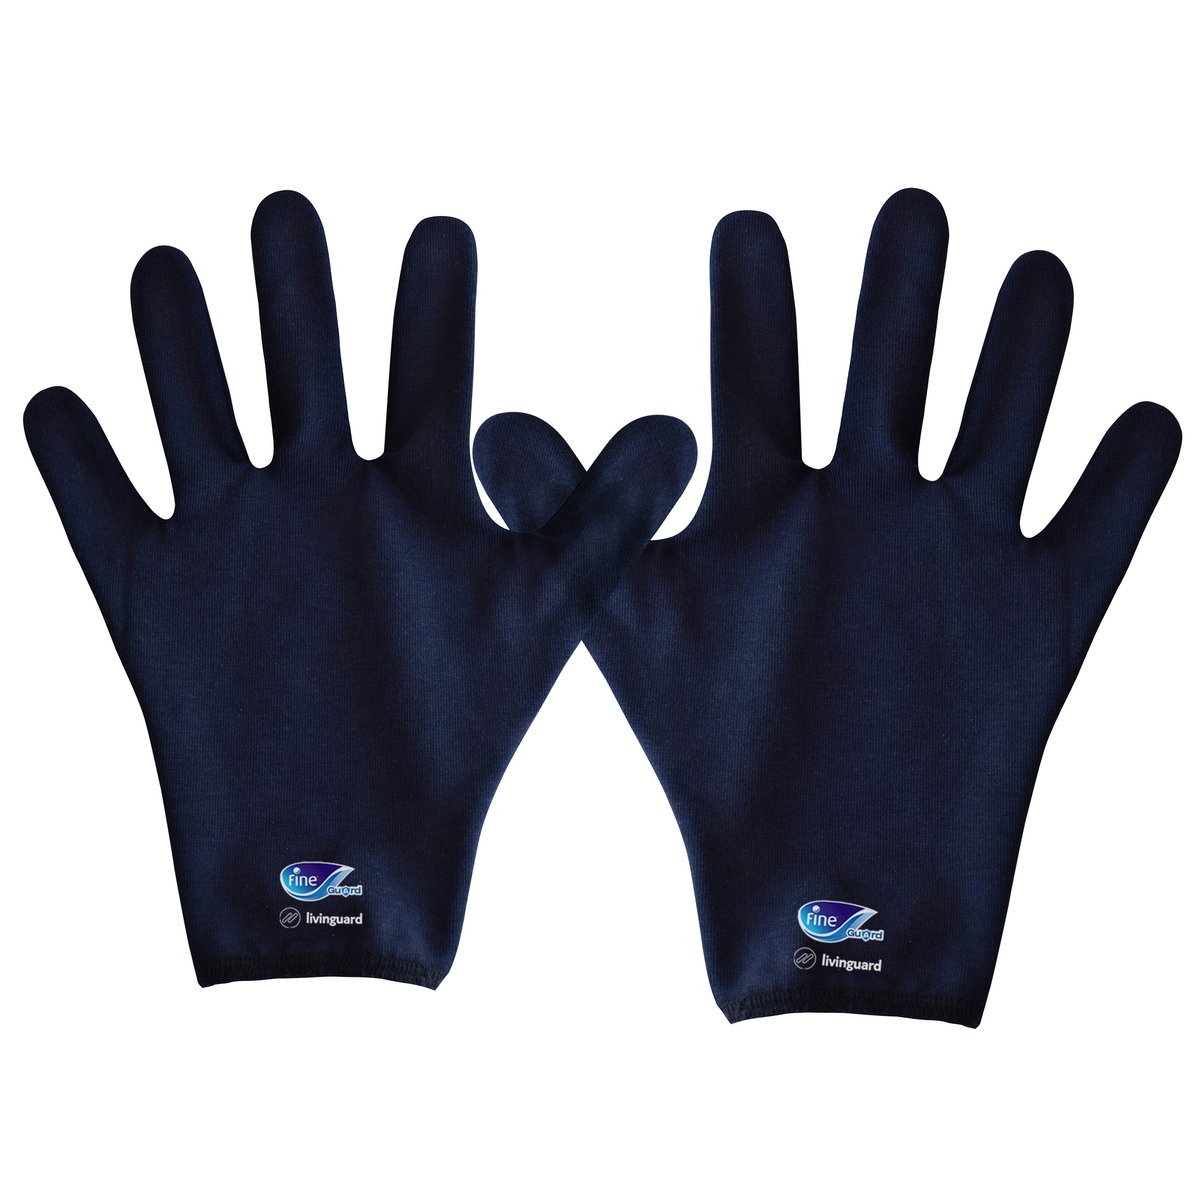 Fine Guard Reusable Protective Gloves Large 1 Pair